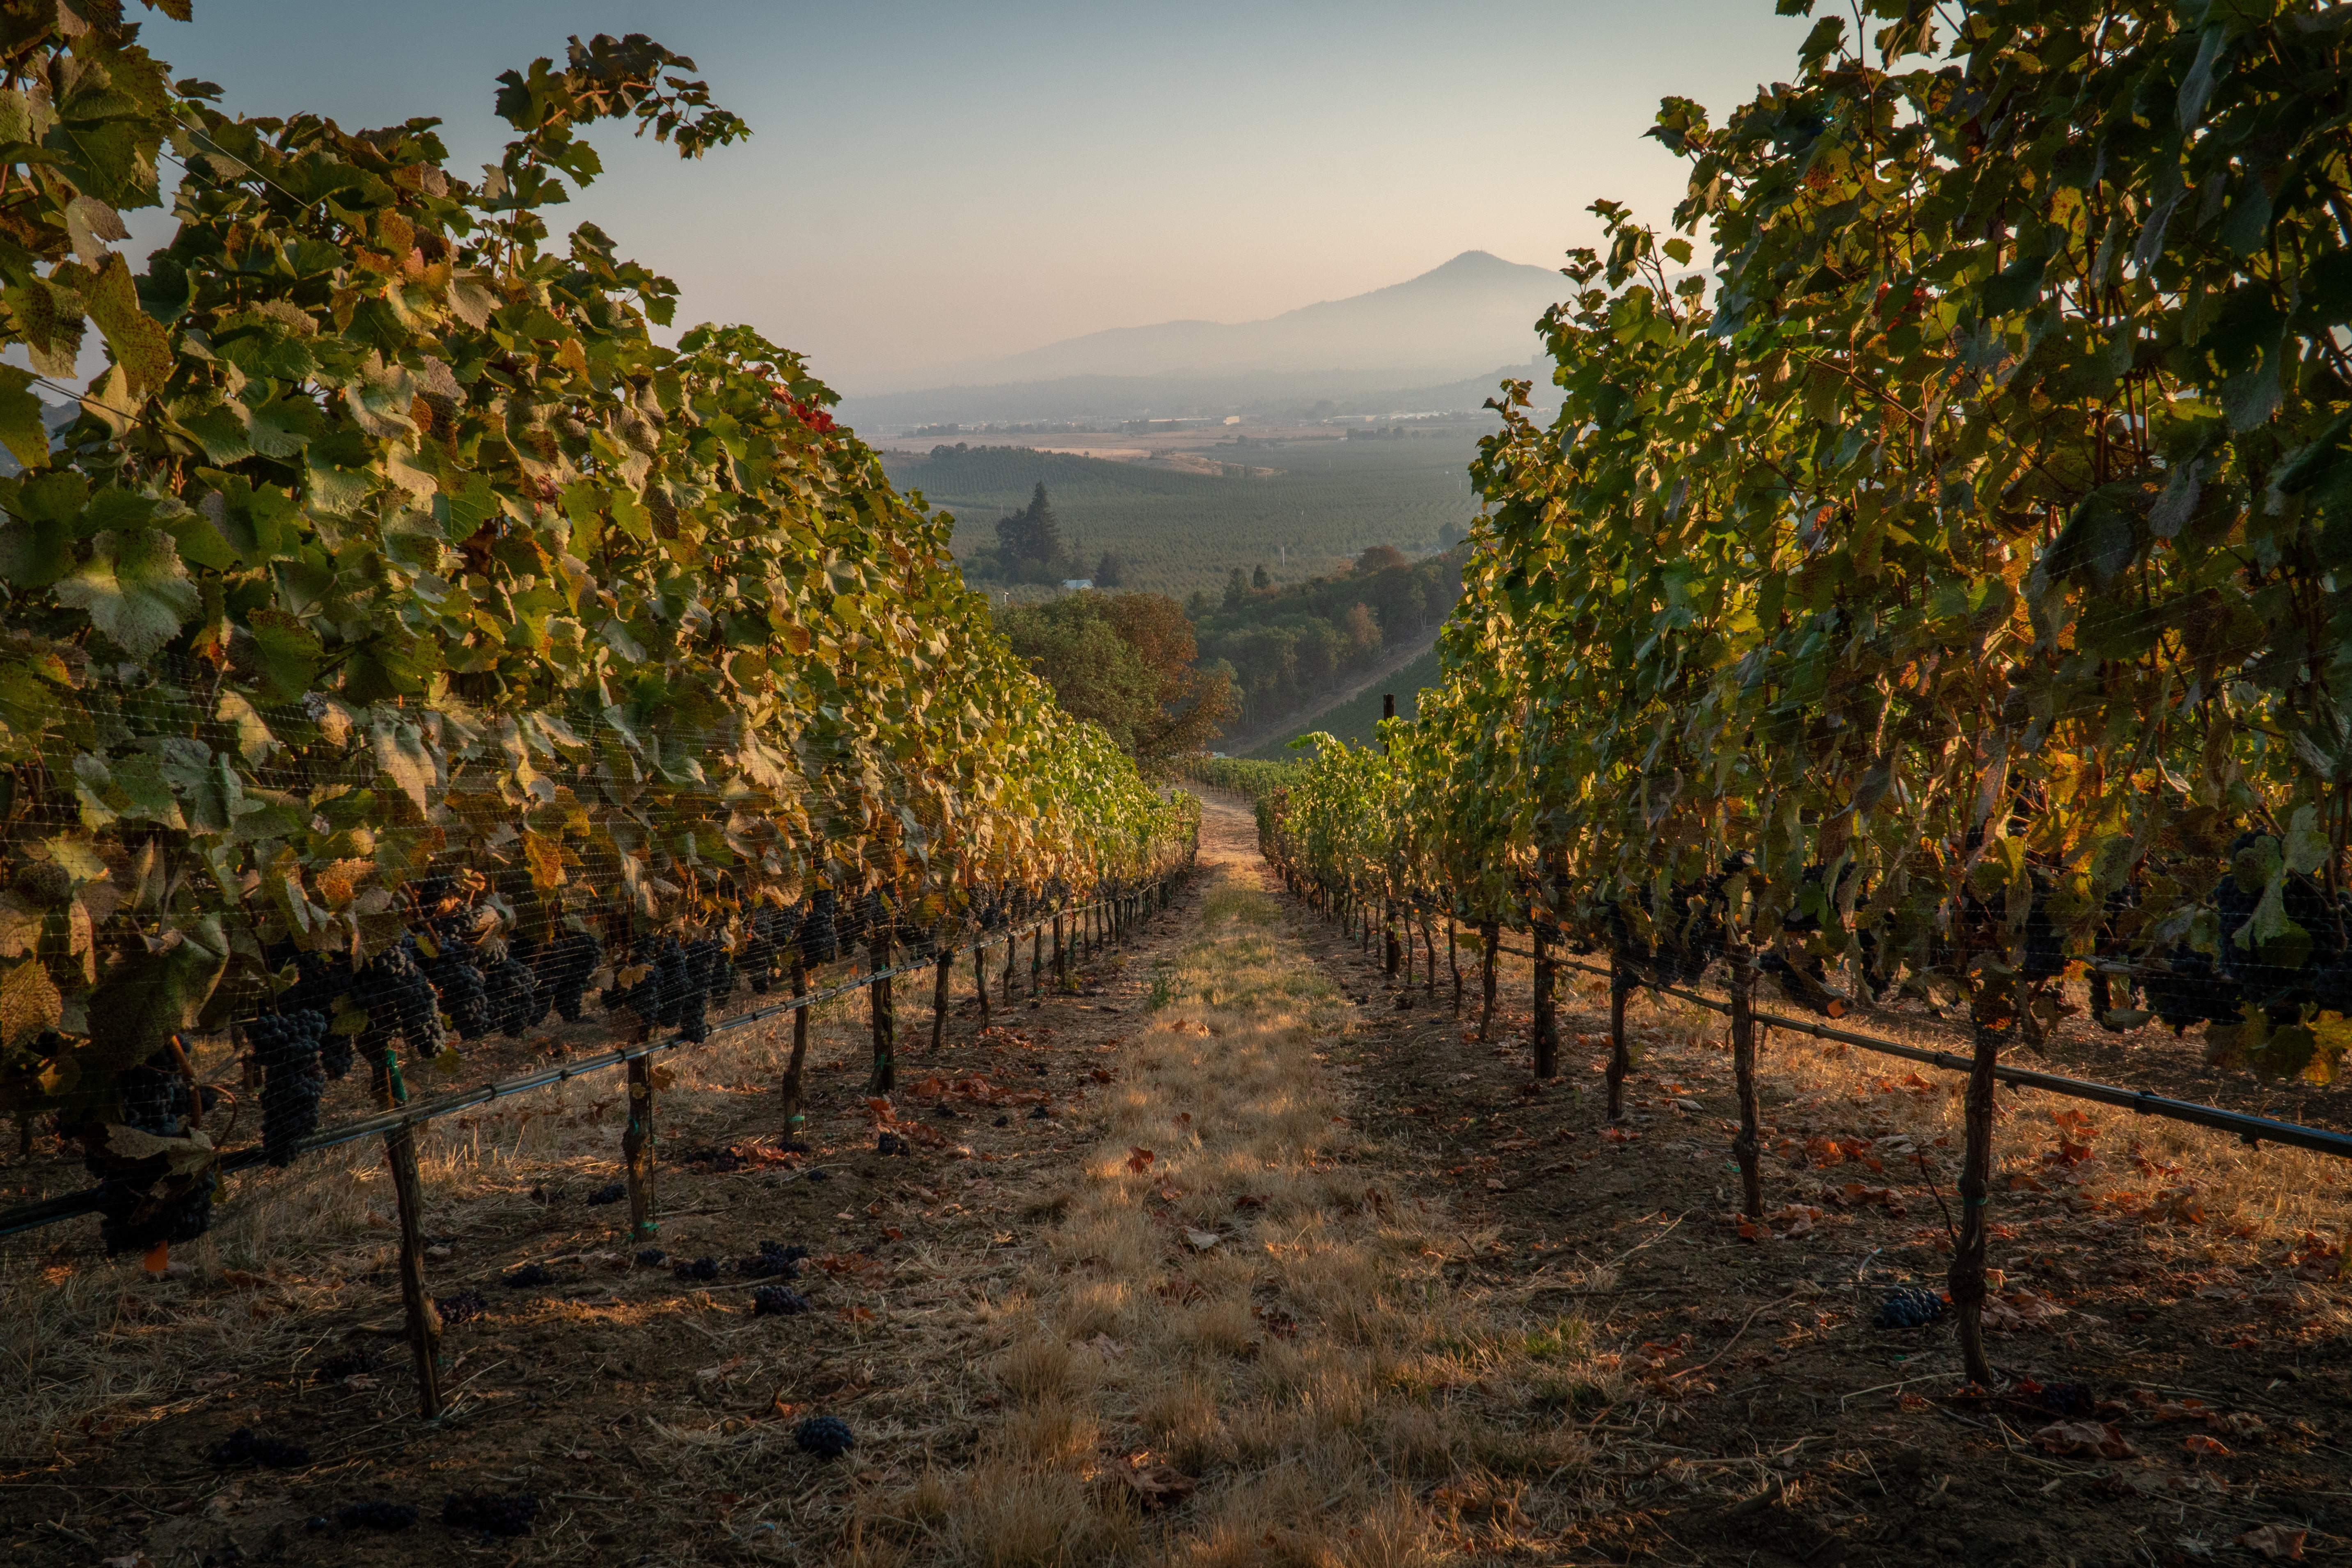 Rows of ripe Rogue Valley wine grapes ready for harvest at a hillside vineyard